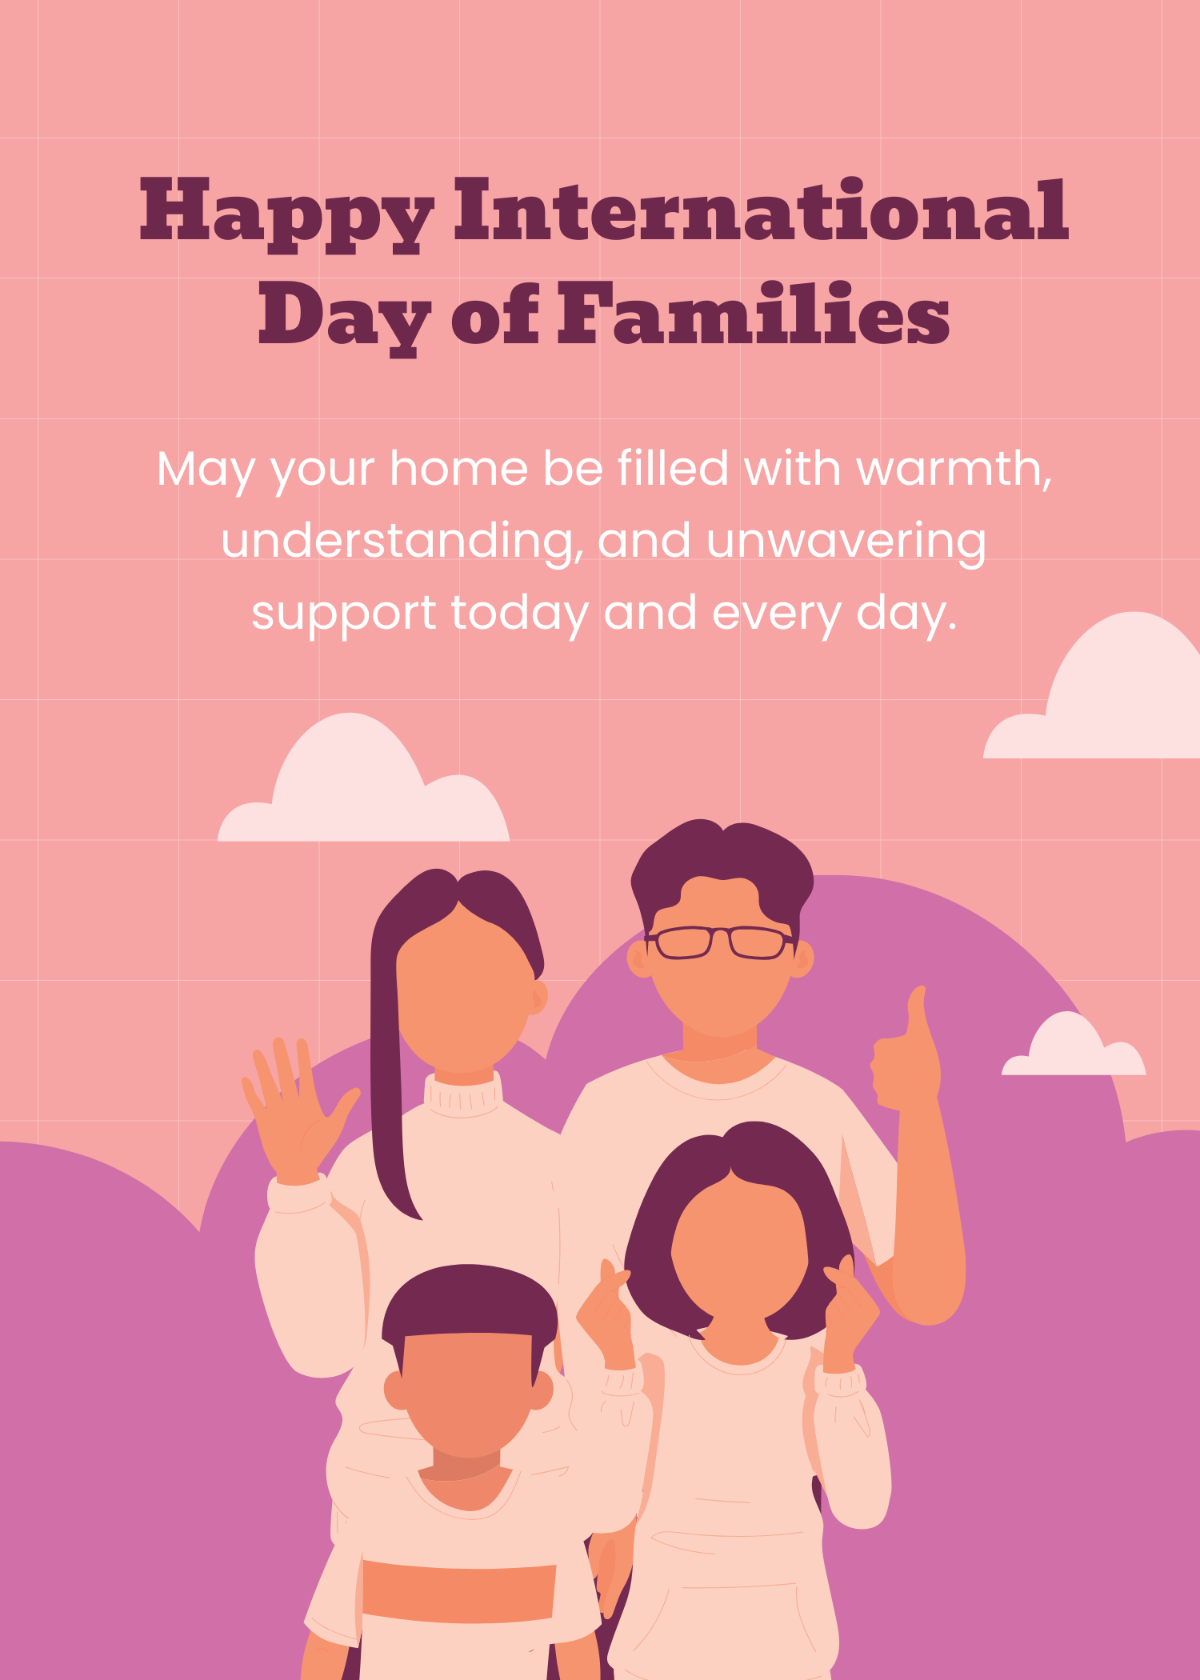 International Day of Families Wishes